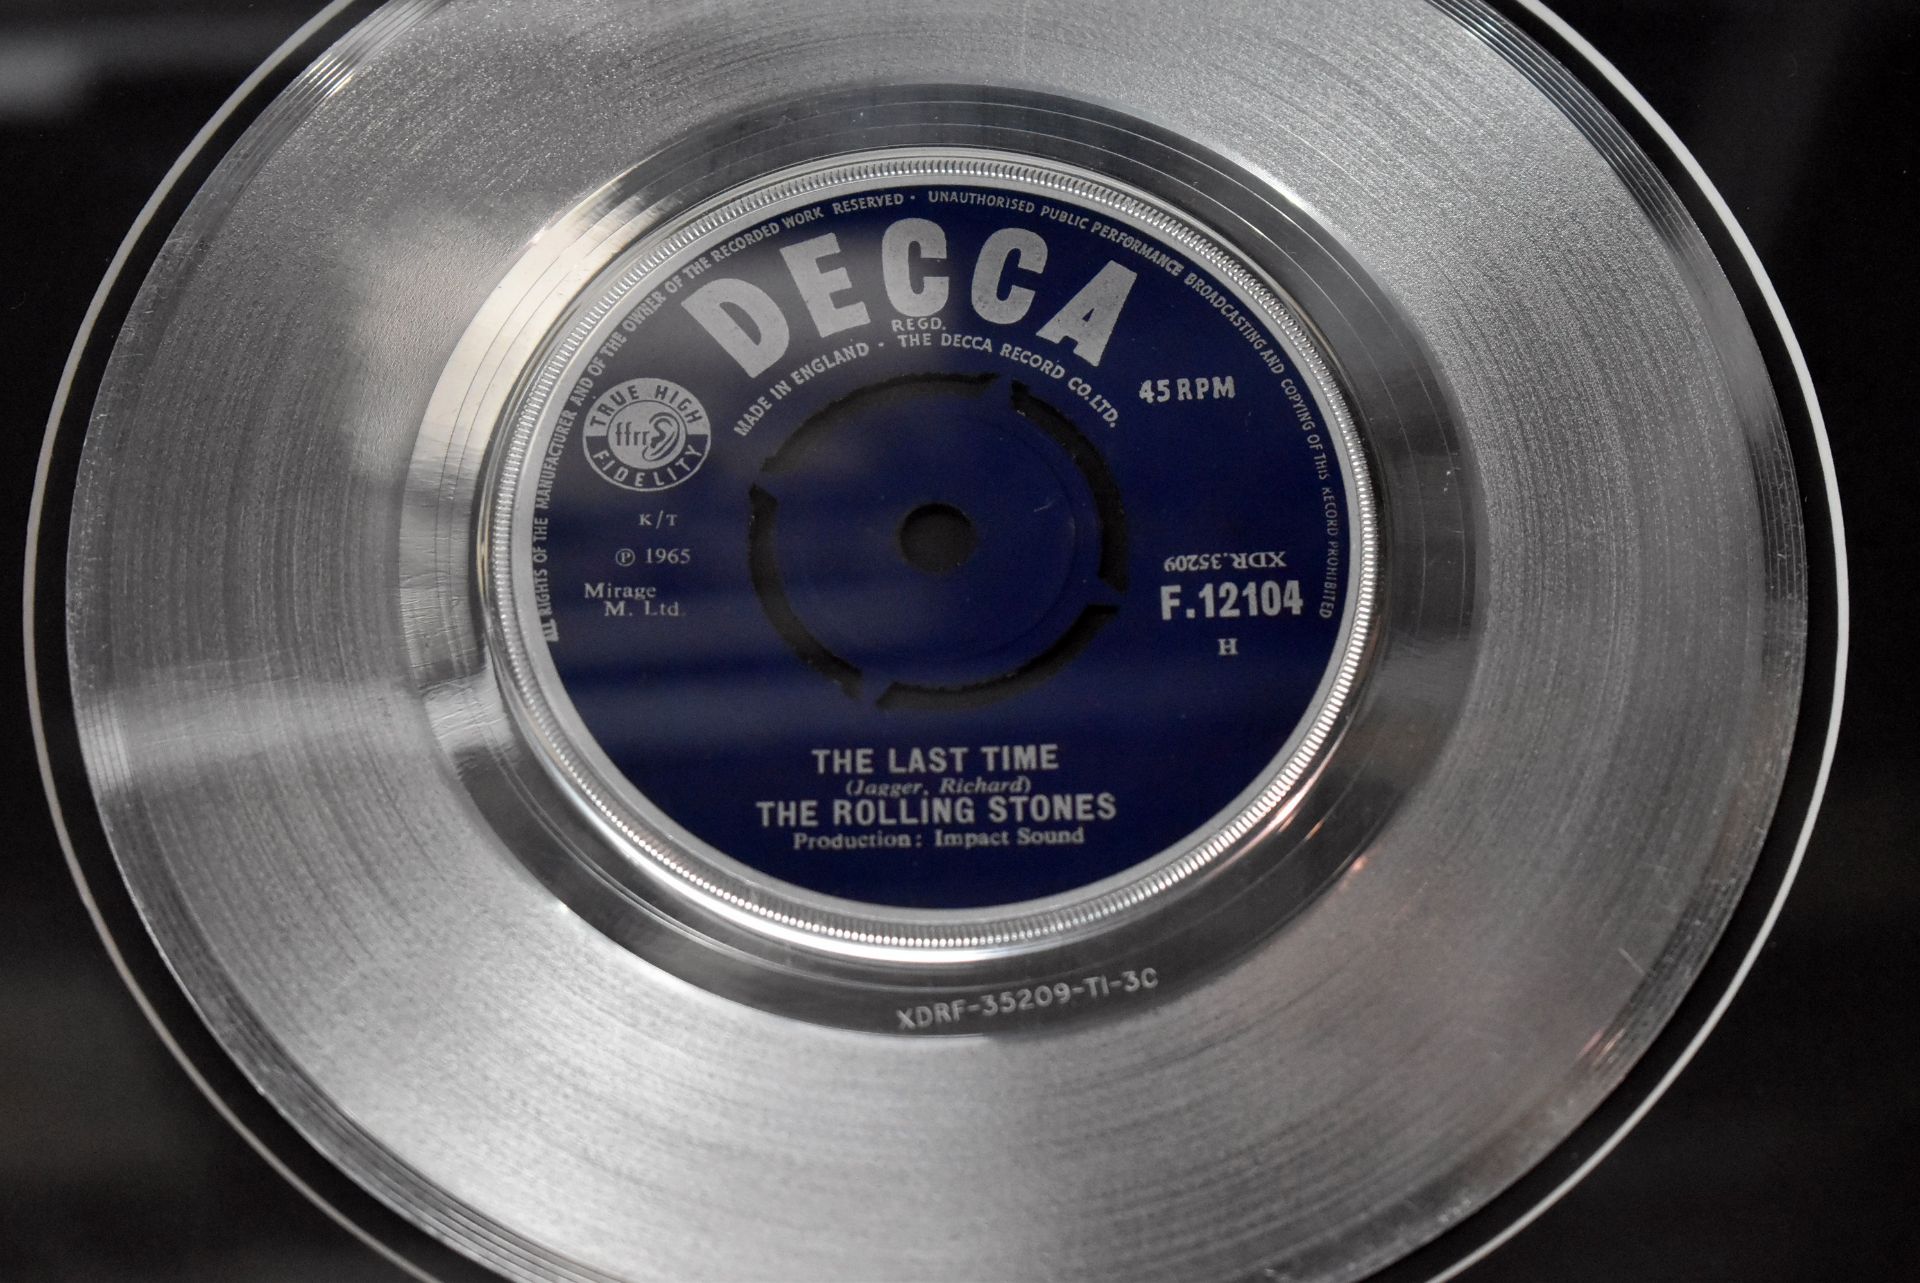 1 x THE ROLLING STONES - The Last Time On Decca Records Framed 7 Inch Vinyl - Image 2 of 4